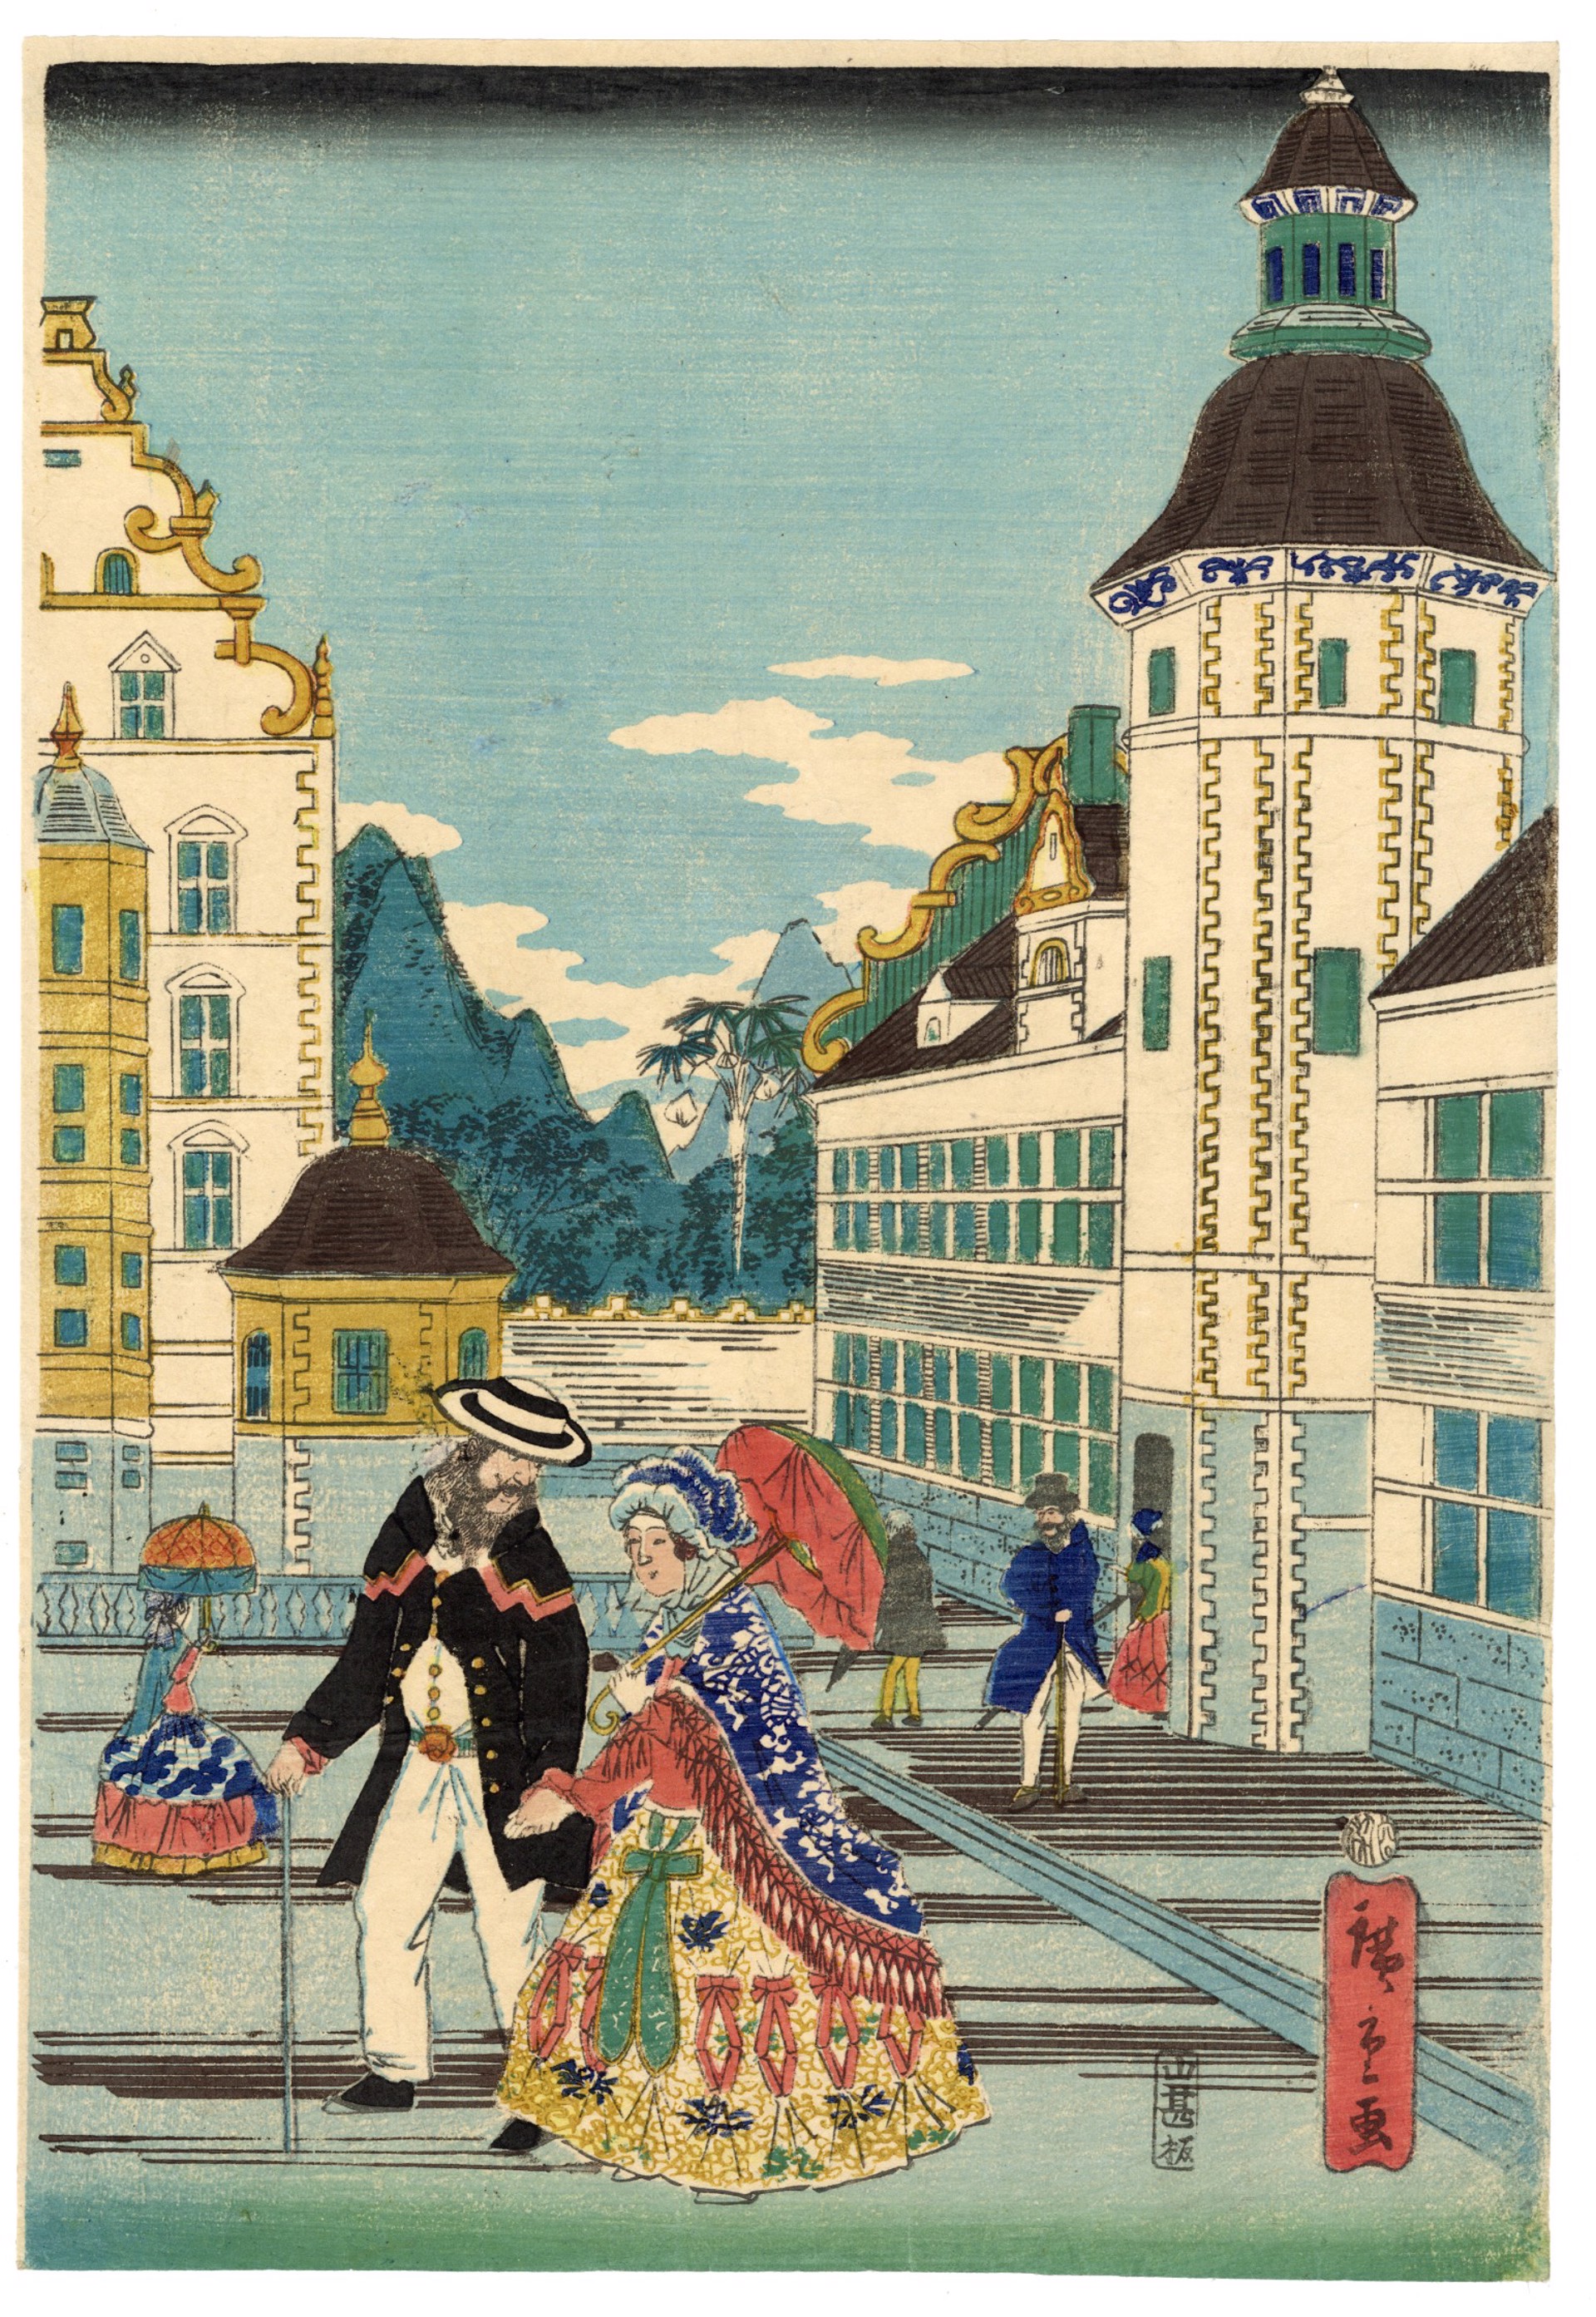 America: A Picture of Prosperity by Hiroshige II